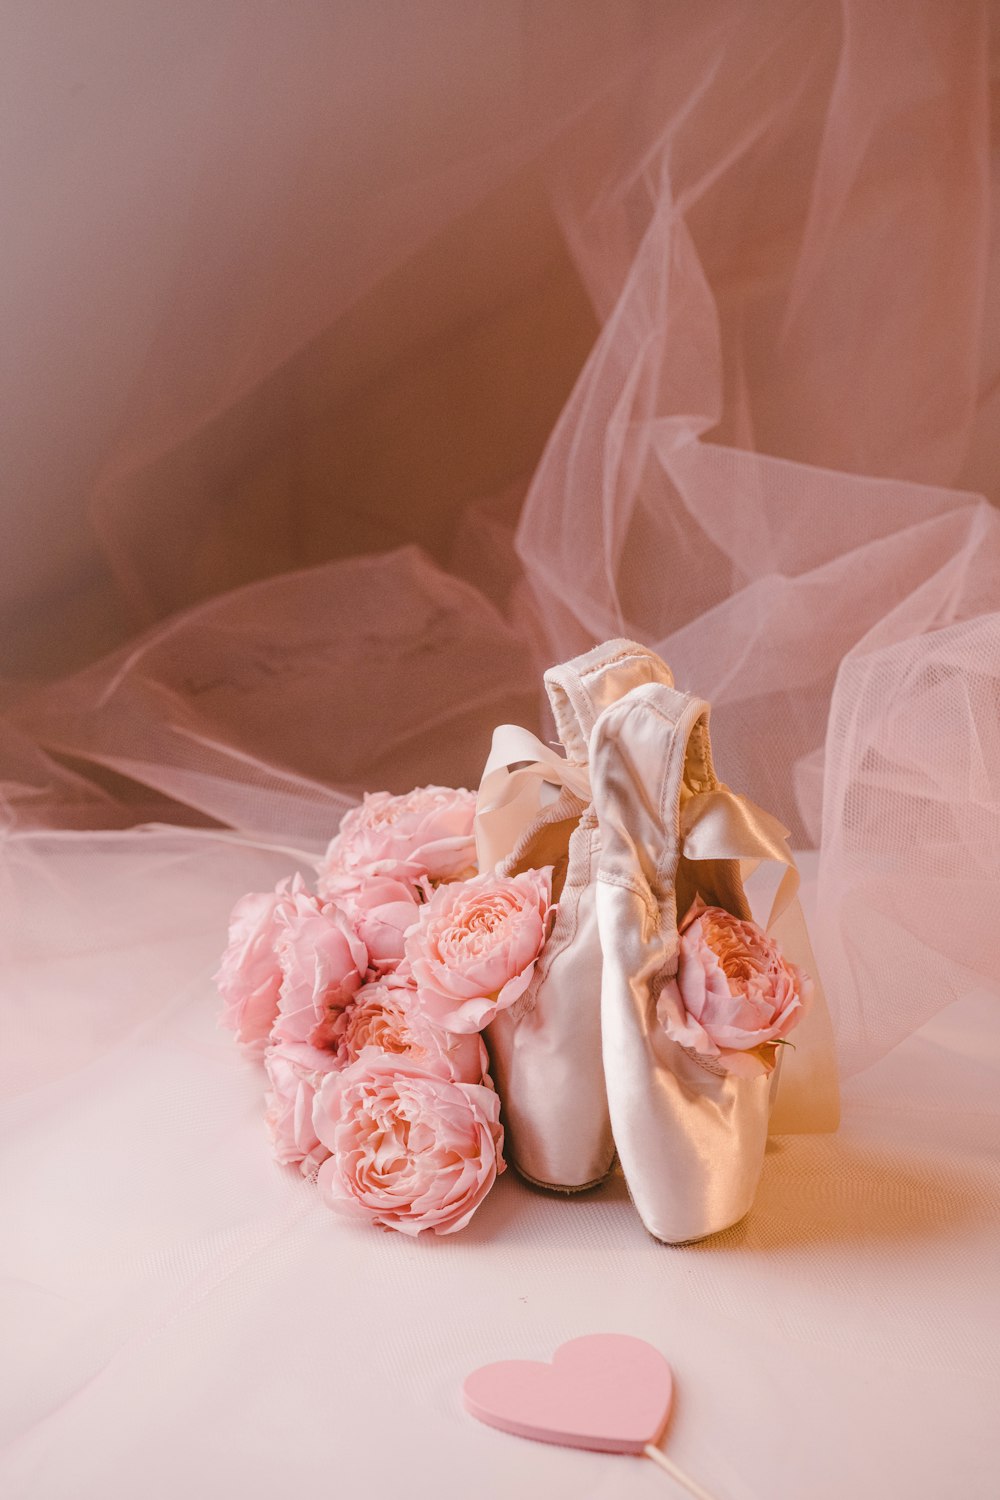 a pair of ballet shoes and a bouquet of roses